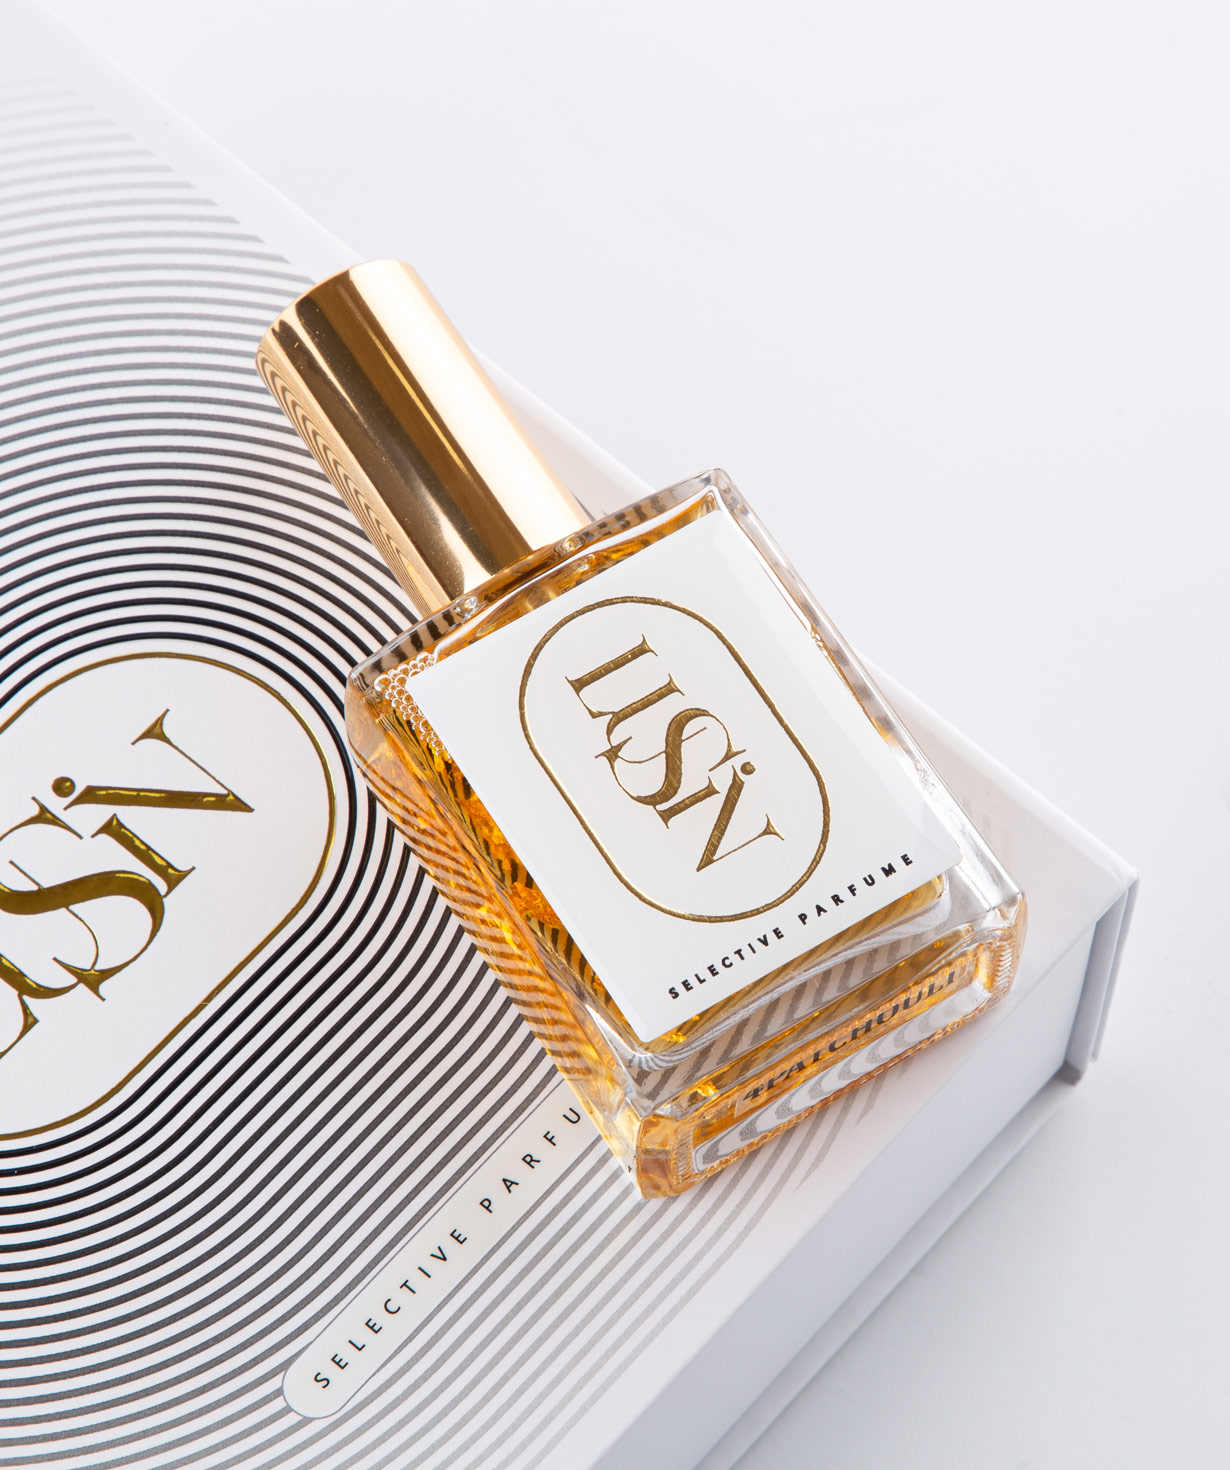 Perfume `Lusin parfume` with your name / surname